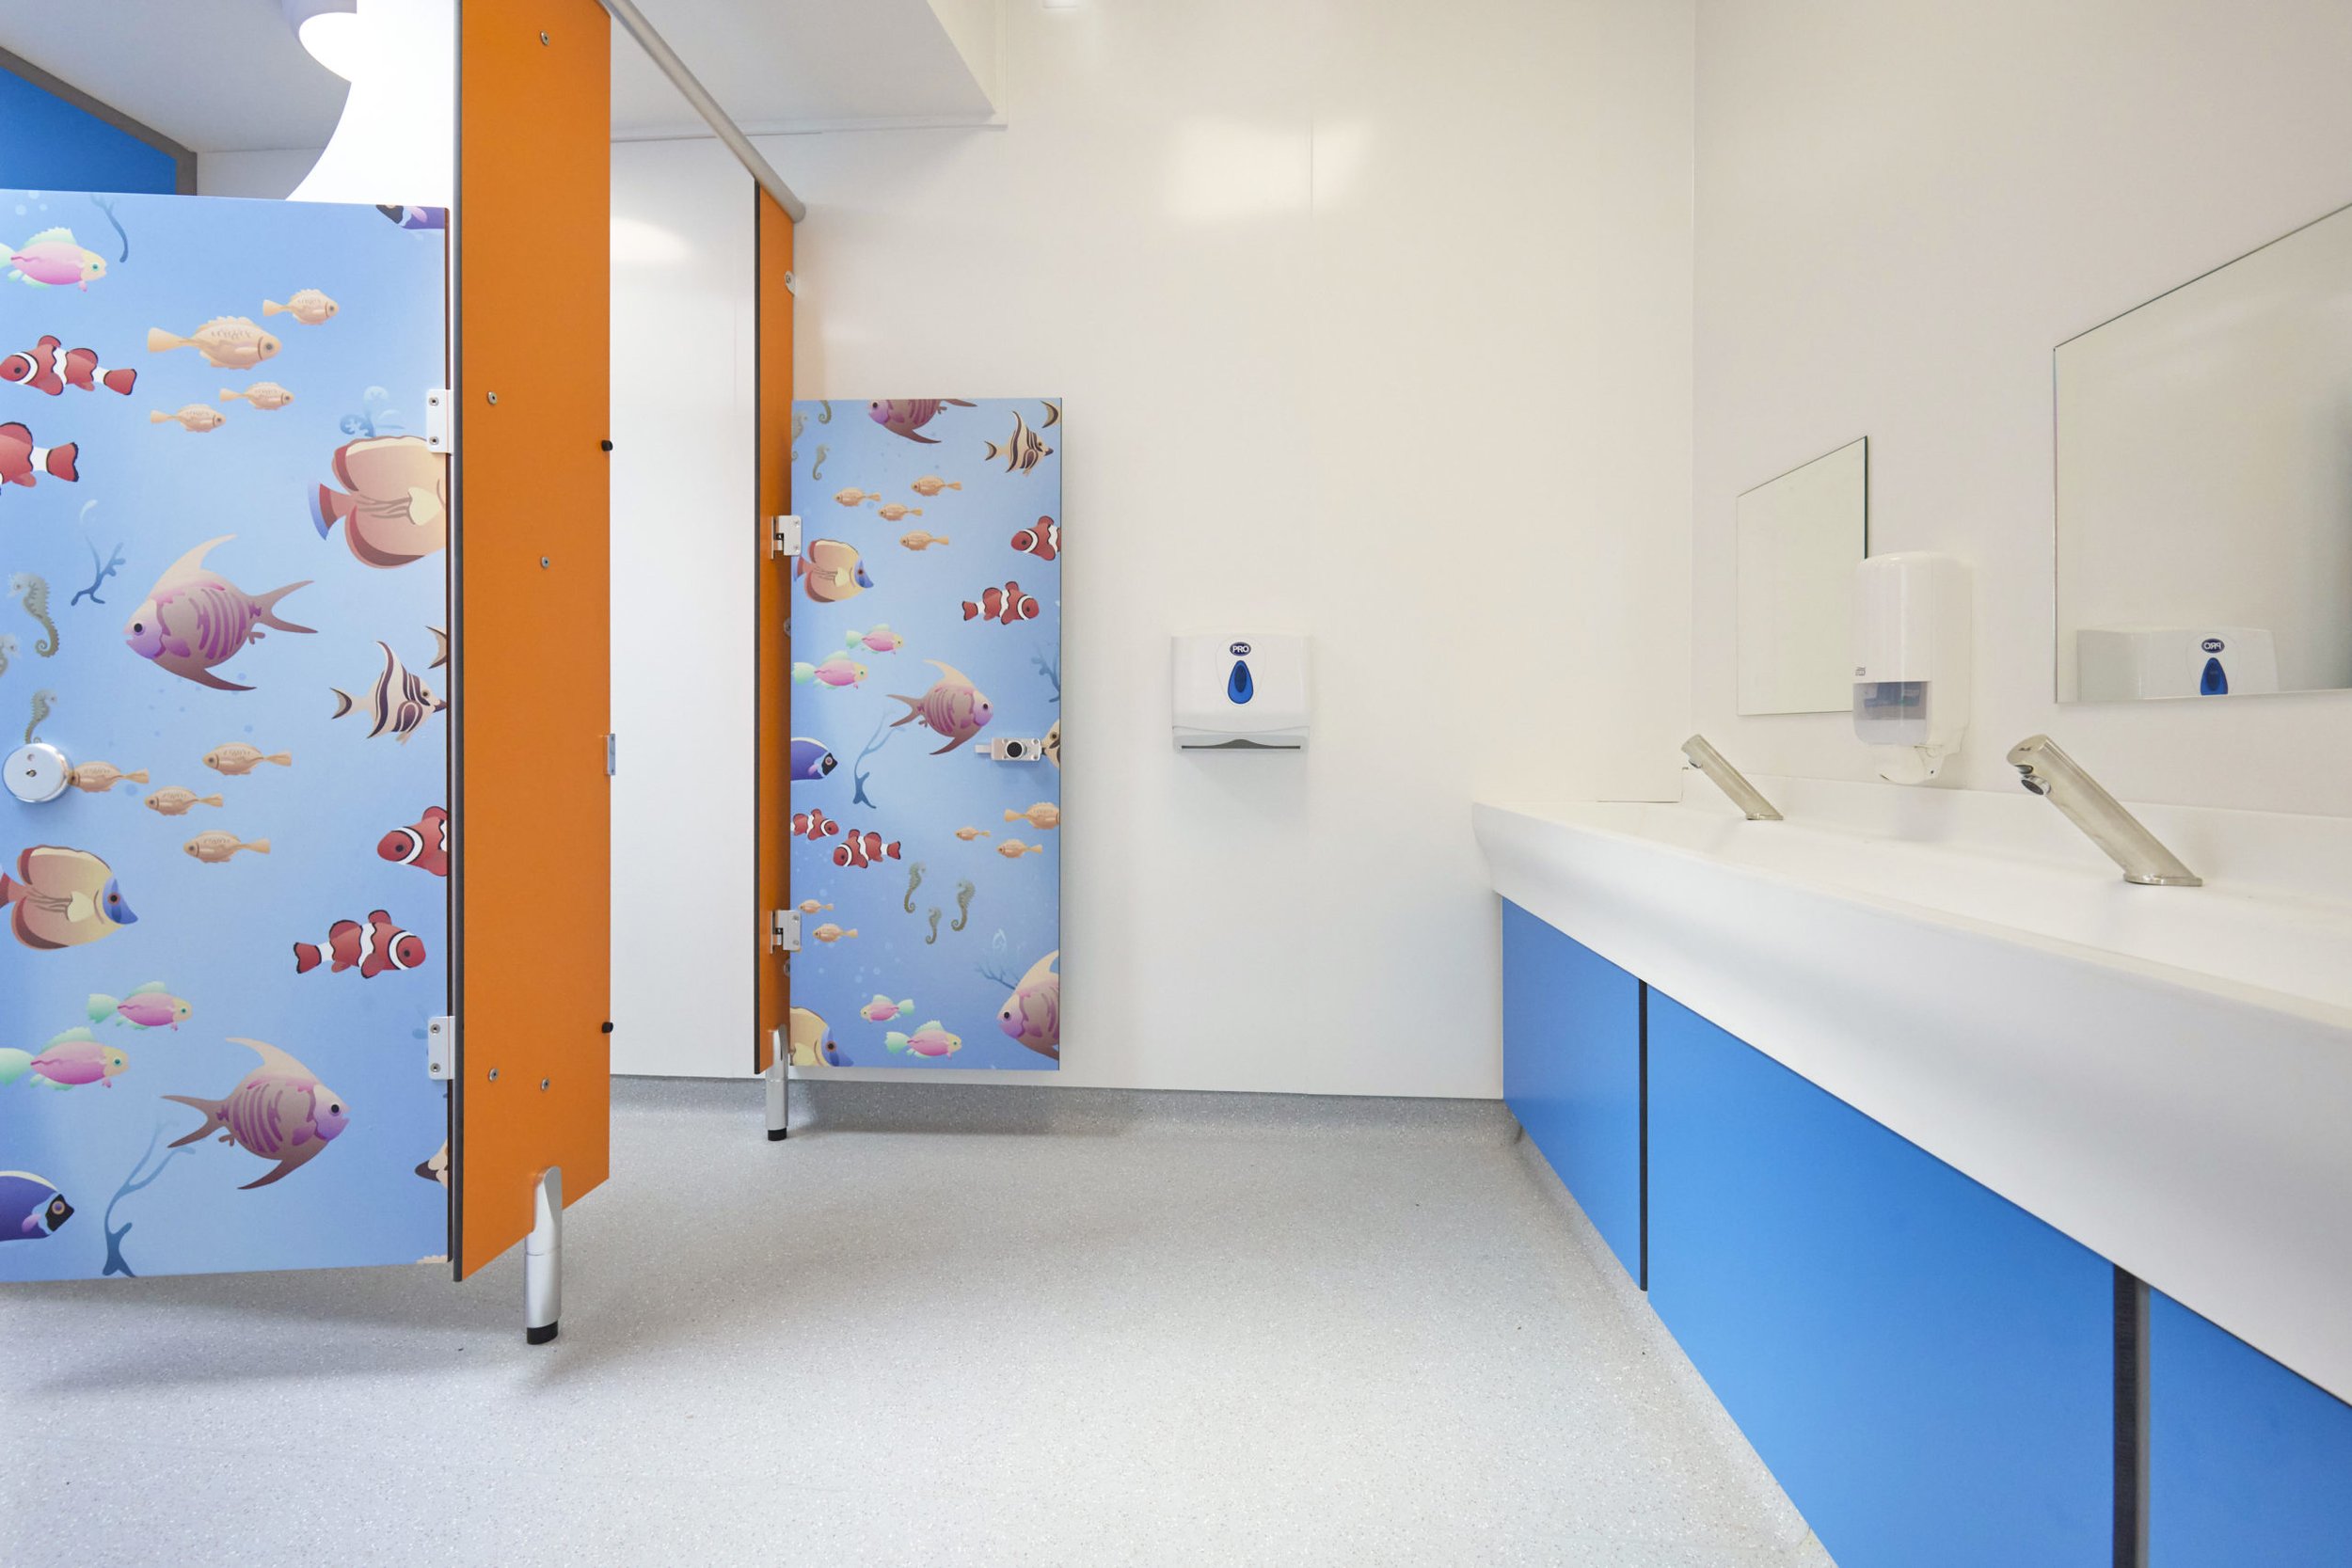 a blue vanity unit and solid surface wash trough with touch free taps, child lower cubicles in orange and waterworld print in a washroom at upland school.jpg